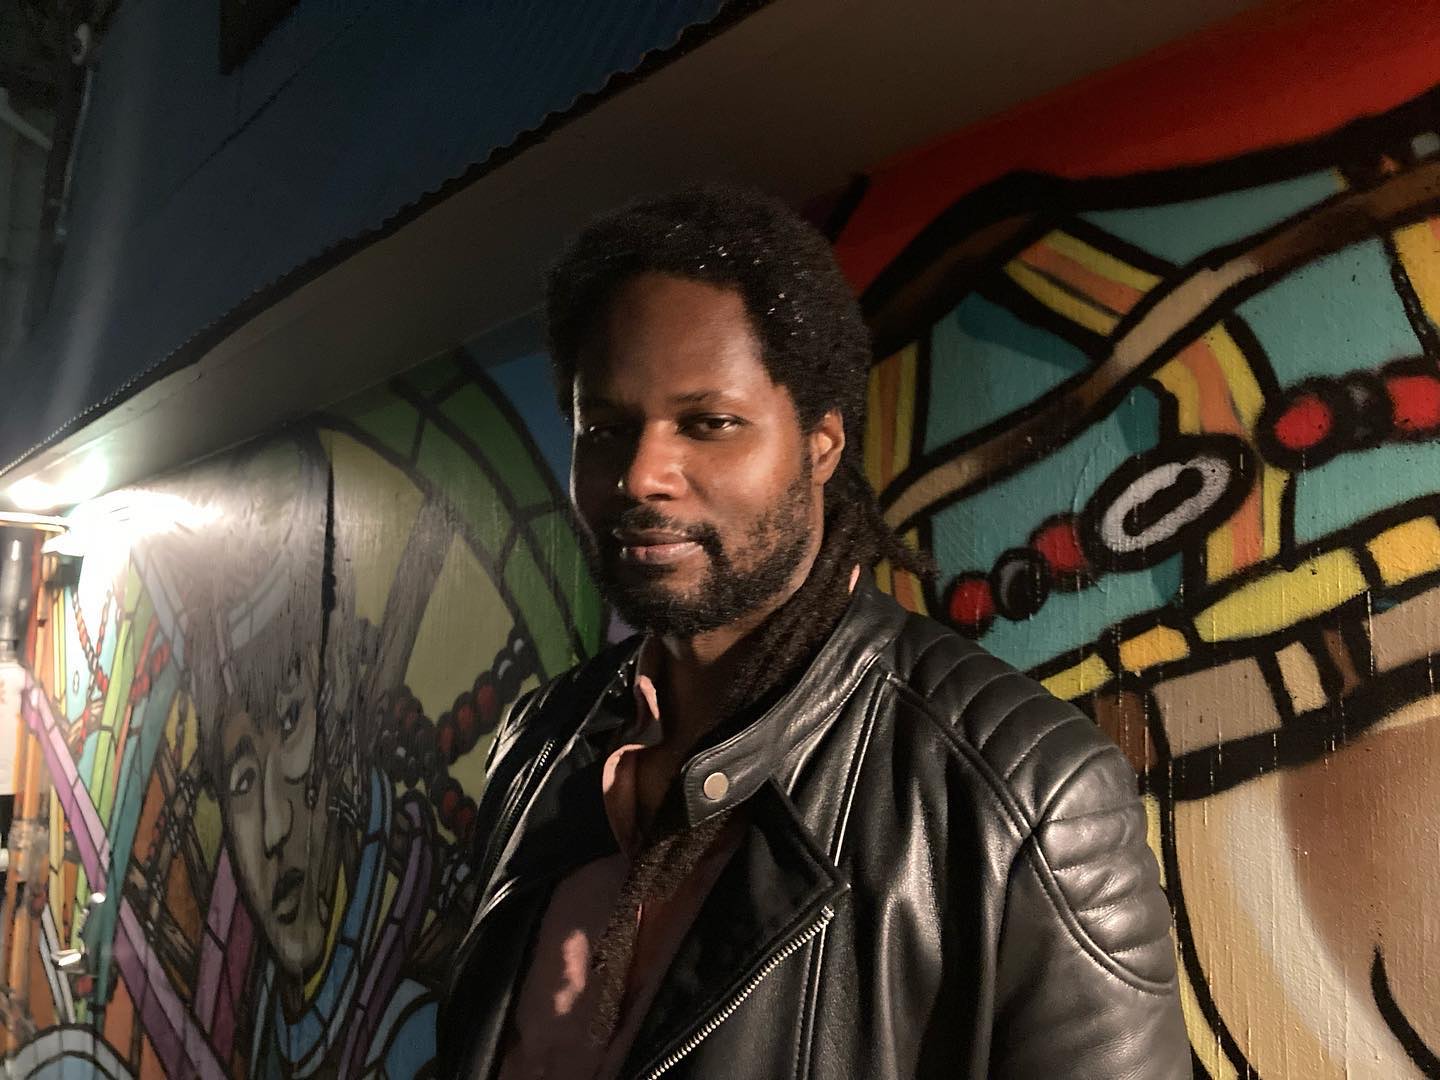 A photograph of a Black man wearing a leather jacket smiling at the camera. He is standing in front of a wall of colorful art.